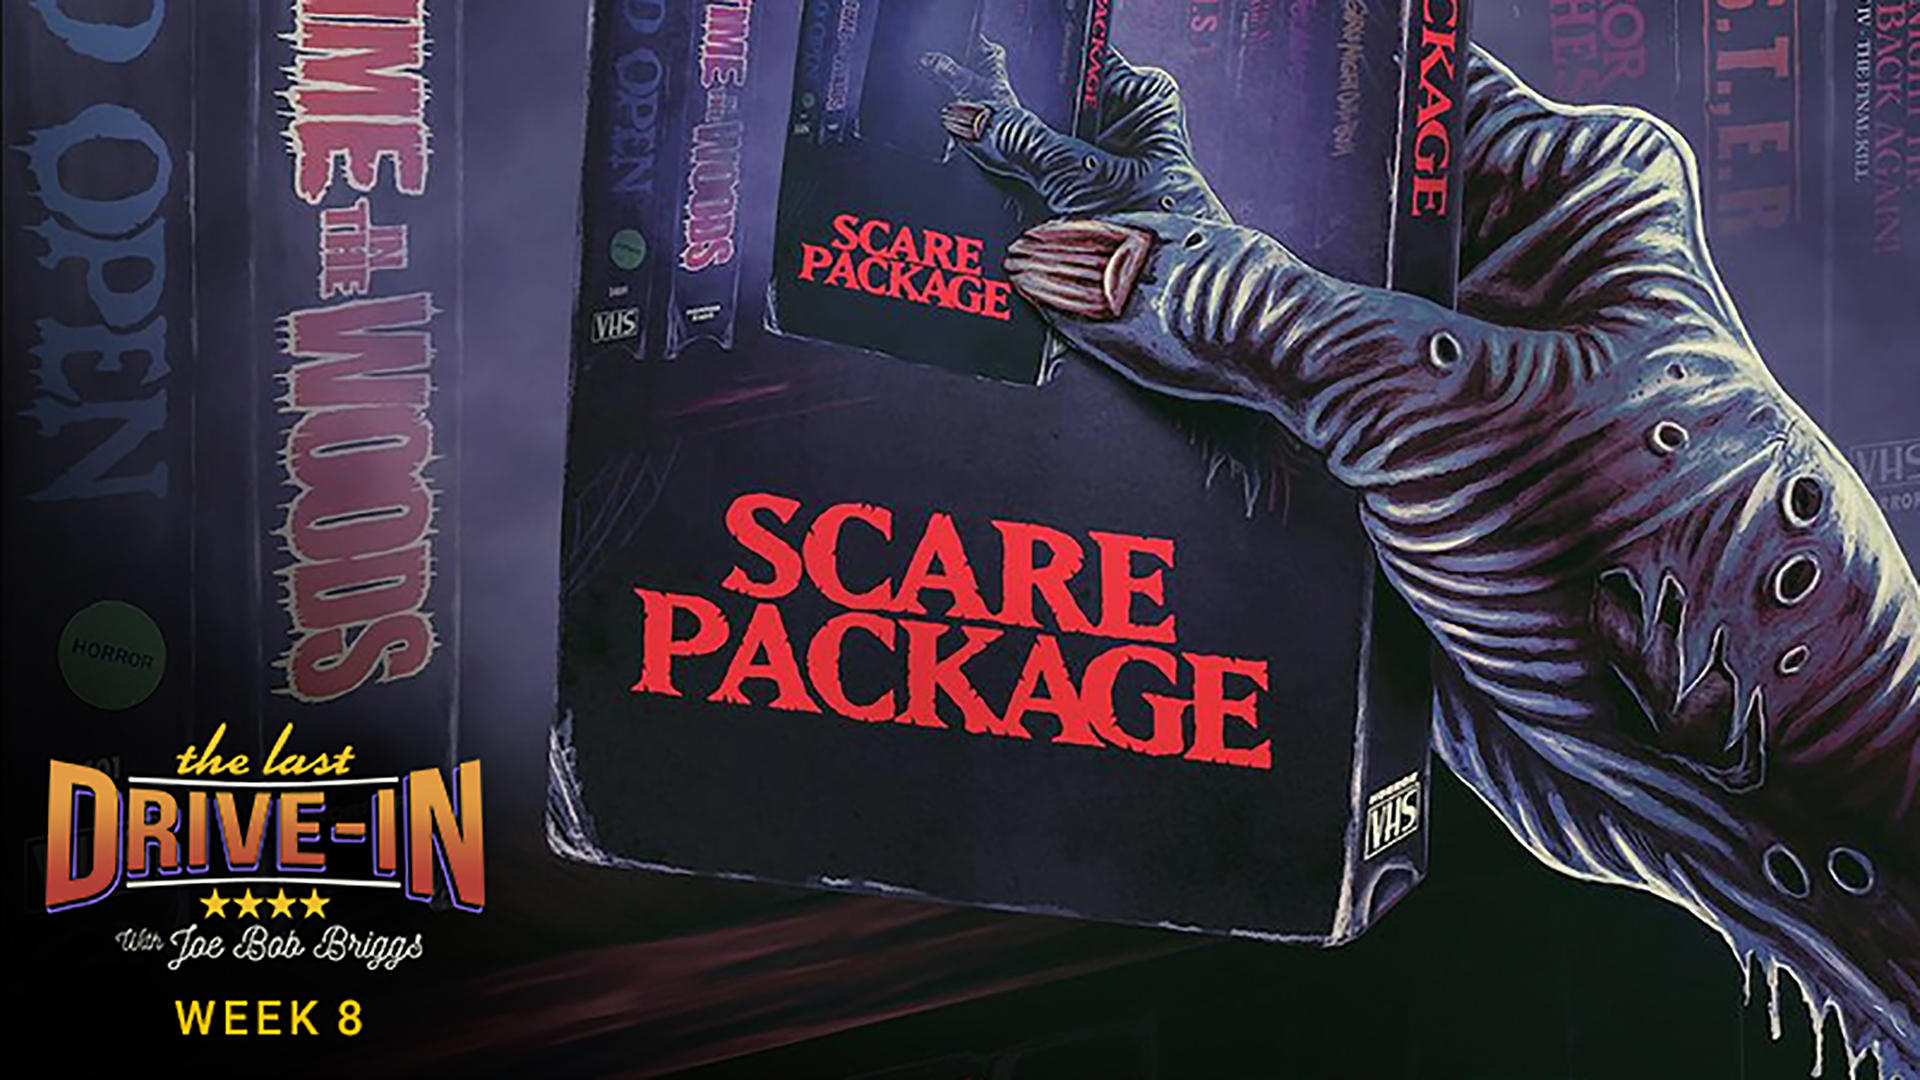 Week 8: Scare Package, A horror aficionado begins to teach an unsuspecting applicant the rules of his video store, but is soon suspected of something sinister., TV-MA, Season 1028422, Episode 15